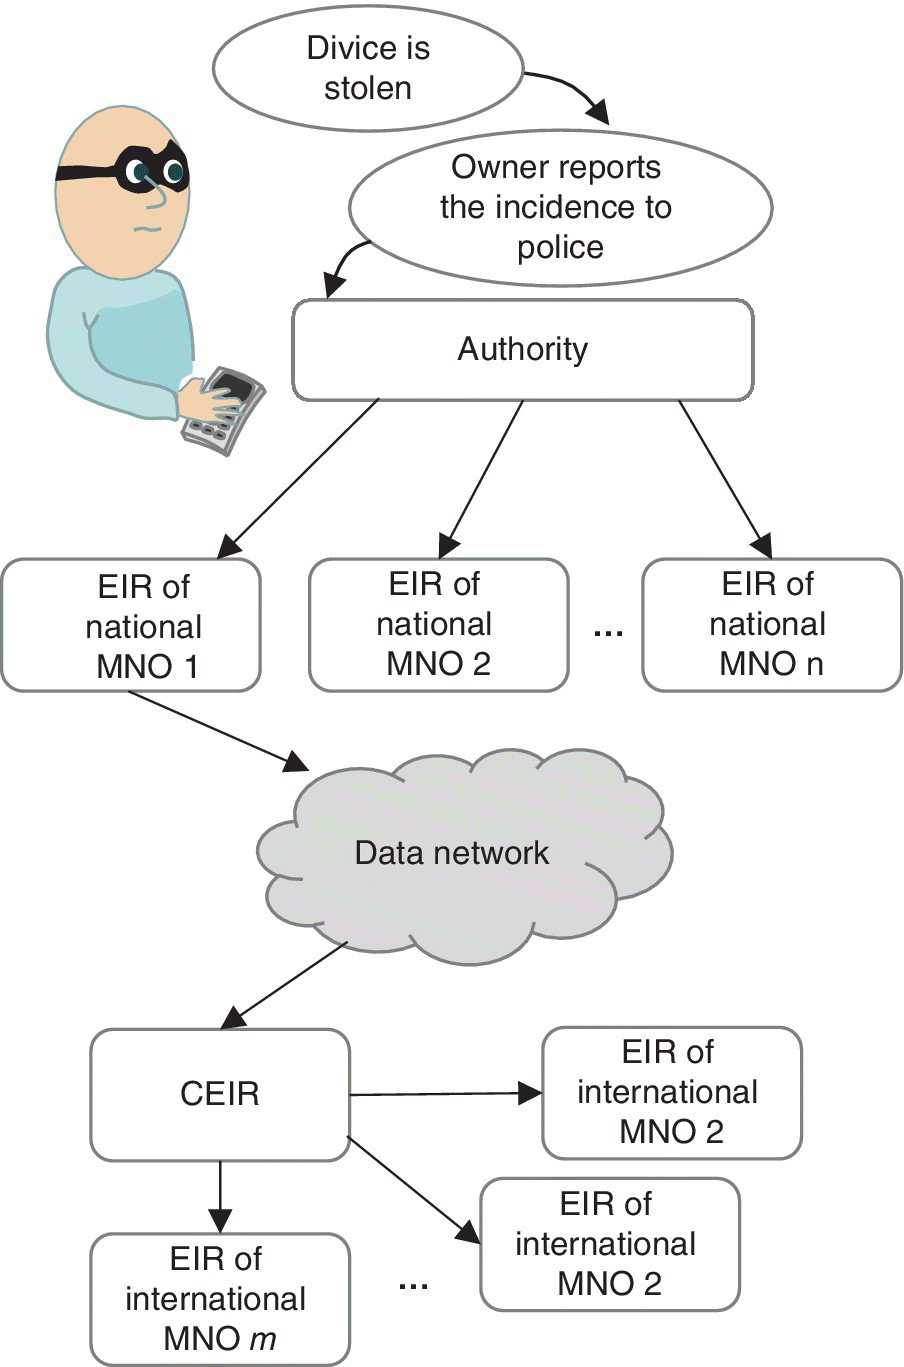 Flow diagram depicting the procedure of the CEIR communications, displaying ellipses, rounded rectangles, and a cloud shape with corresponding labels.